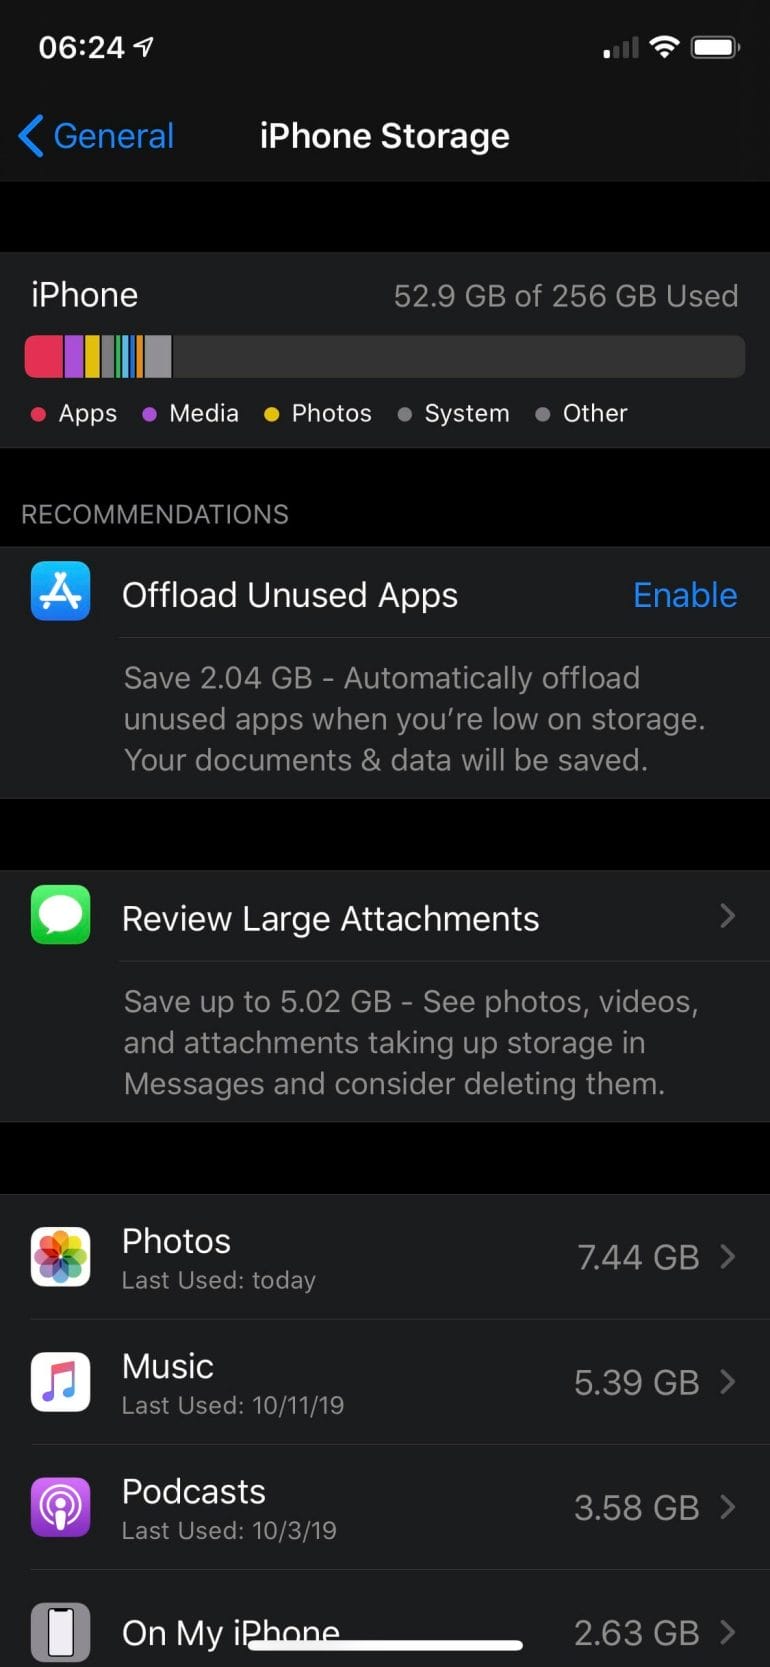 iPhone Storage: Offload Unused Apps and Review Large Attachments